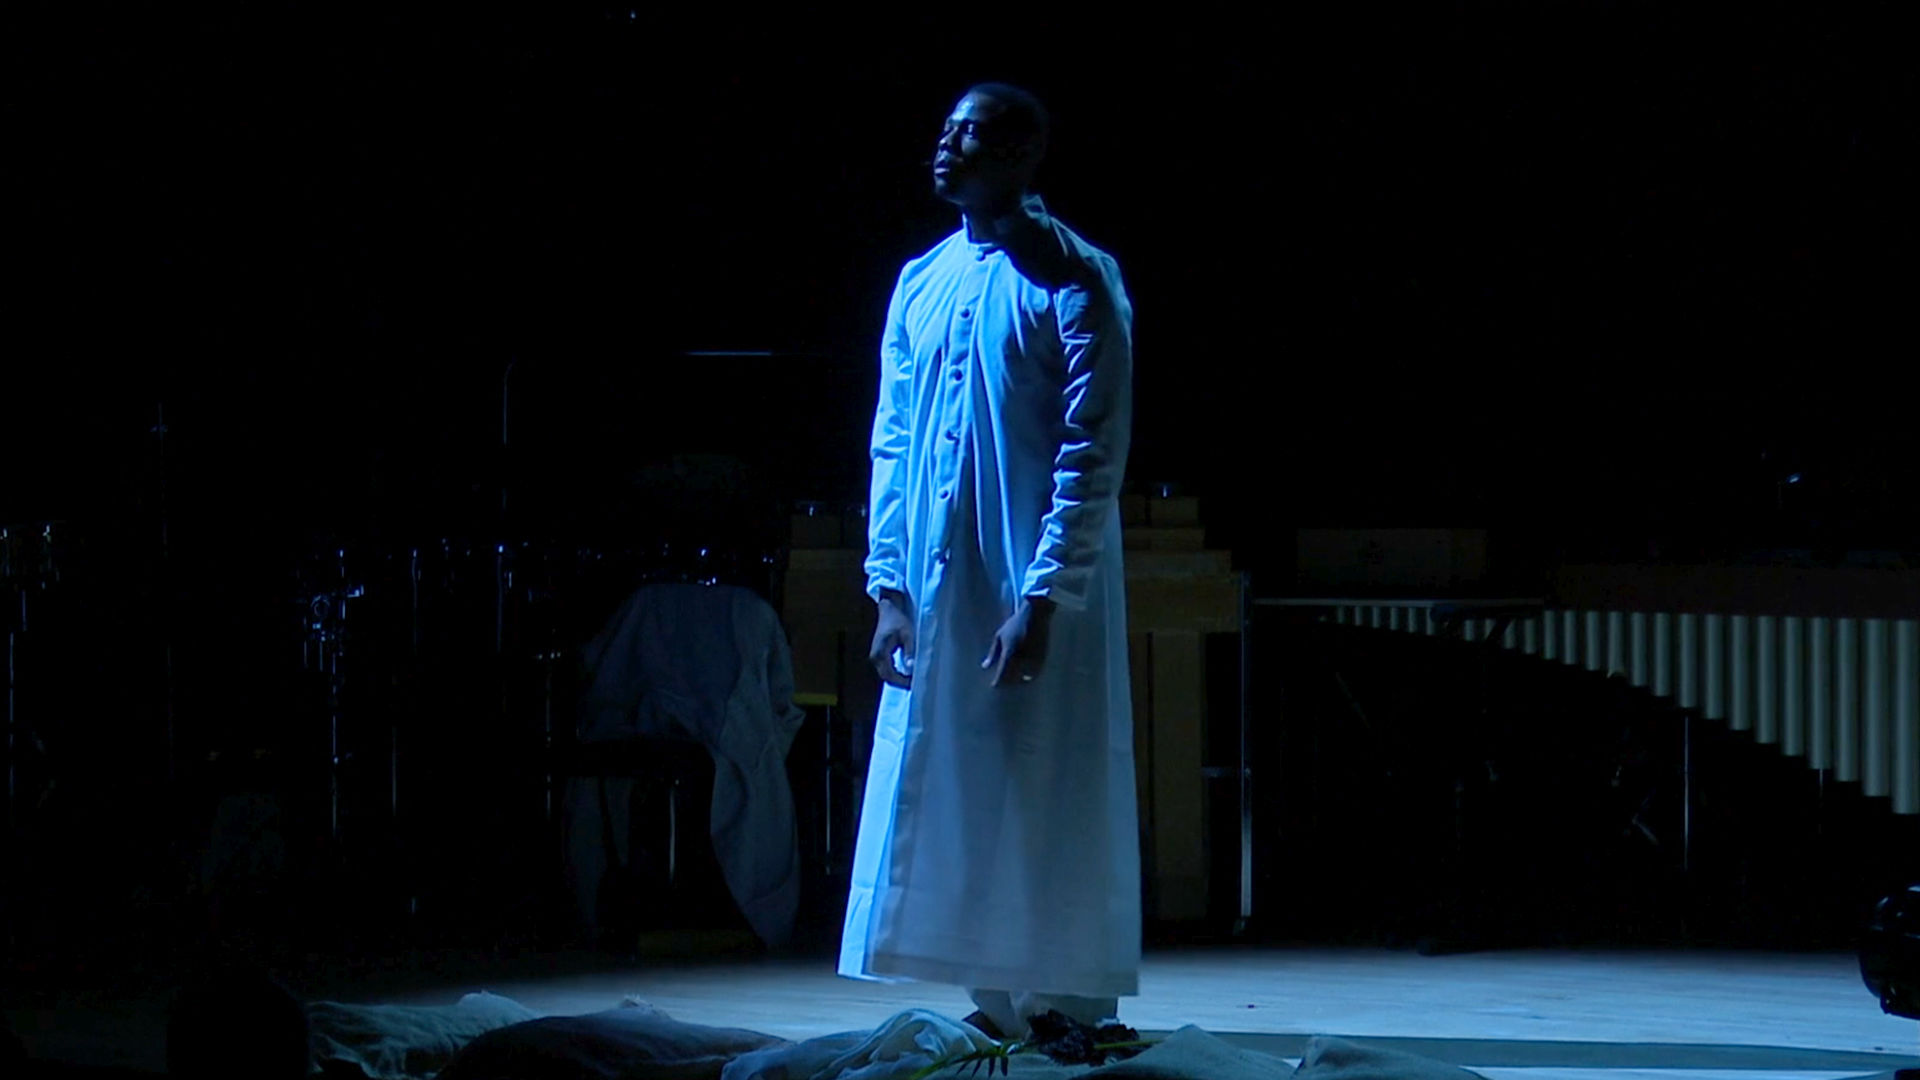 A dark skinned man wearing a long white button-down robe stands on a stage lit by a blue light.